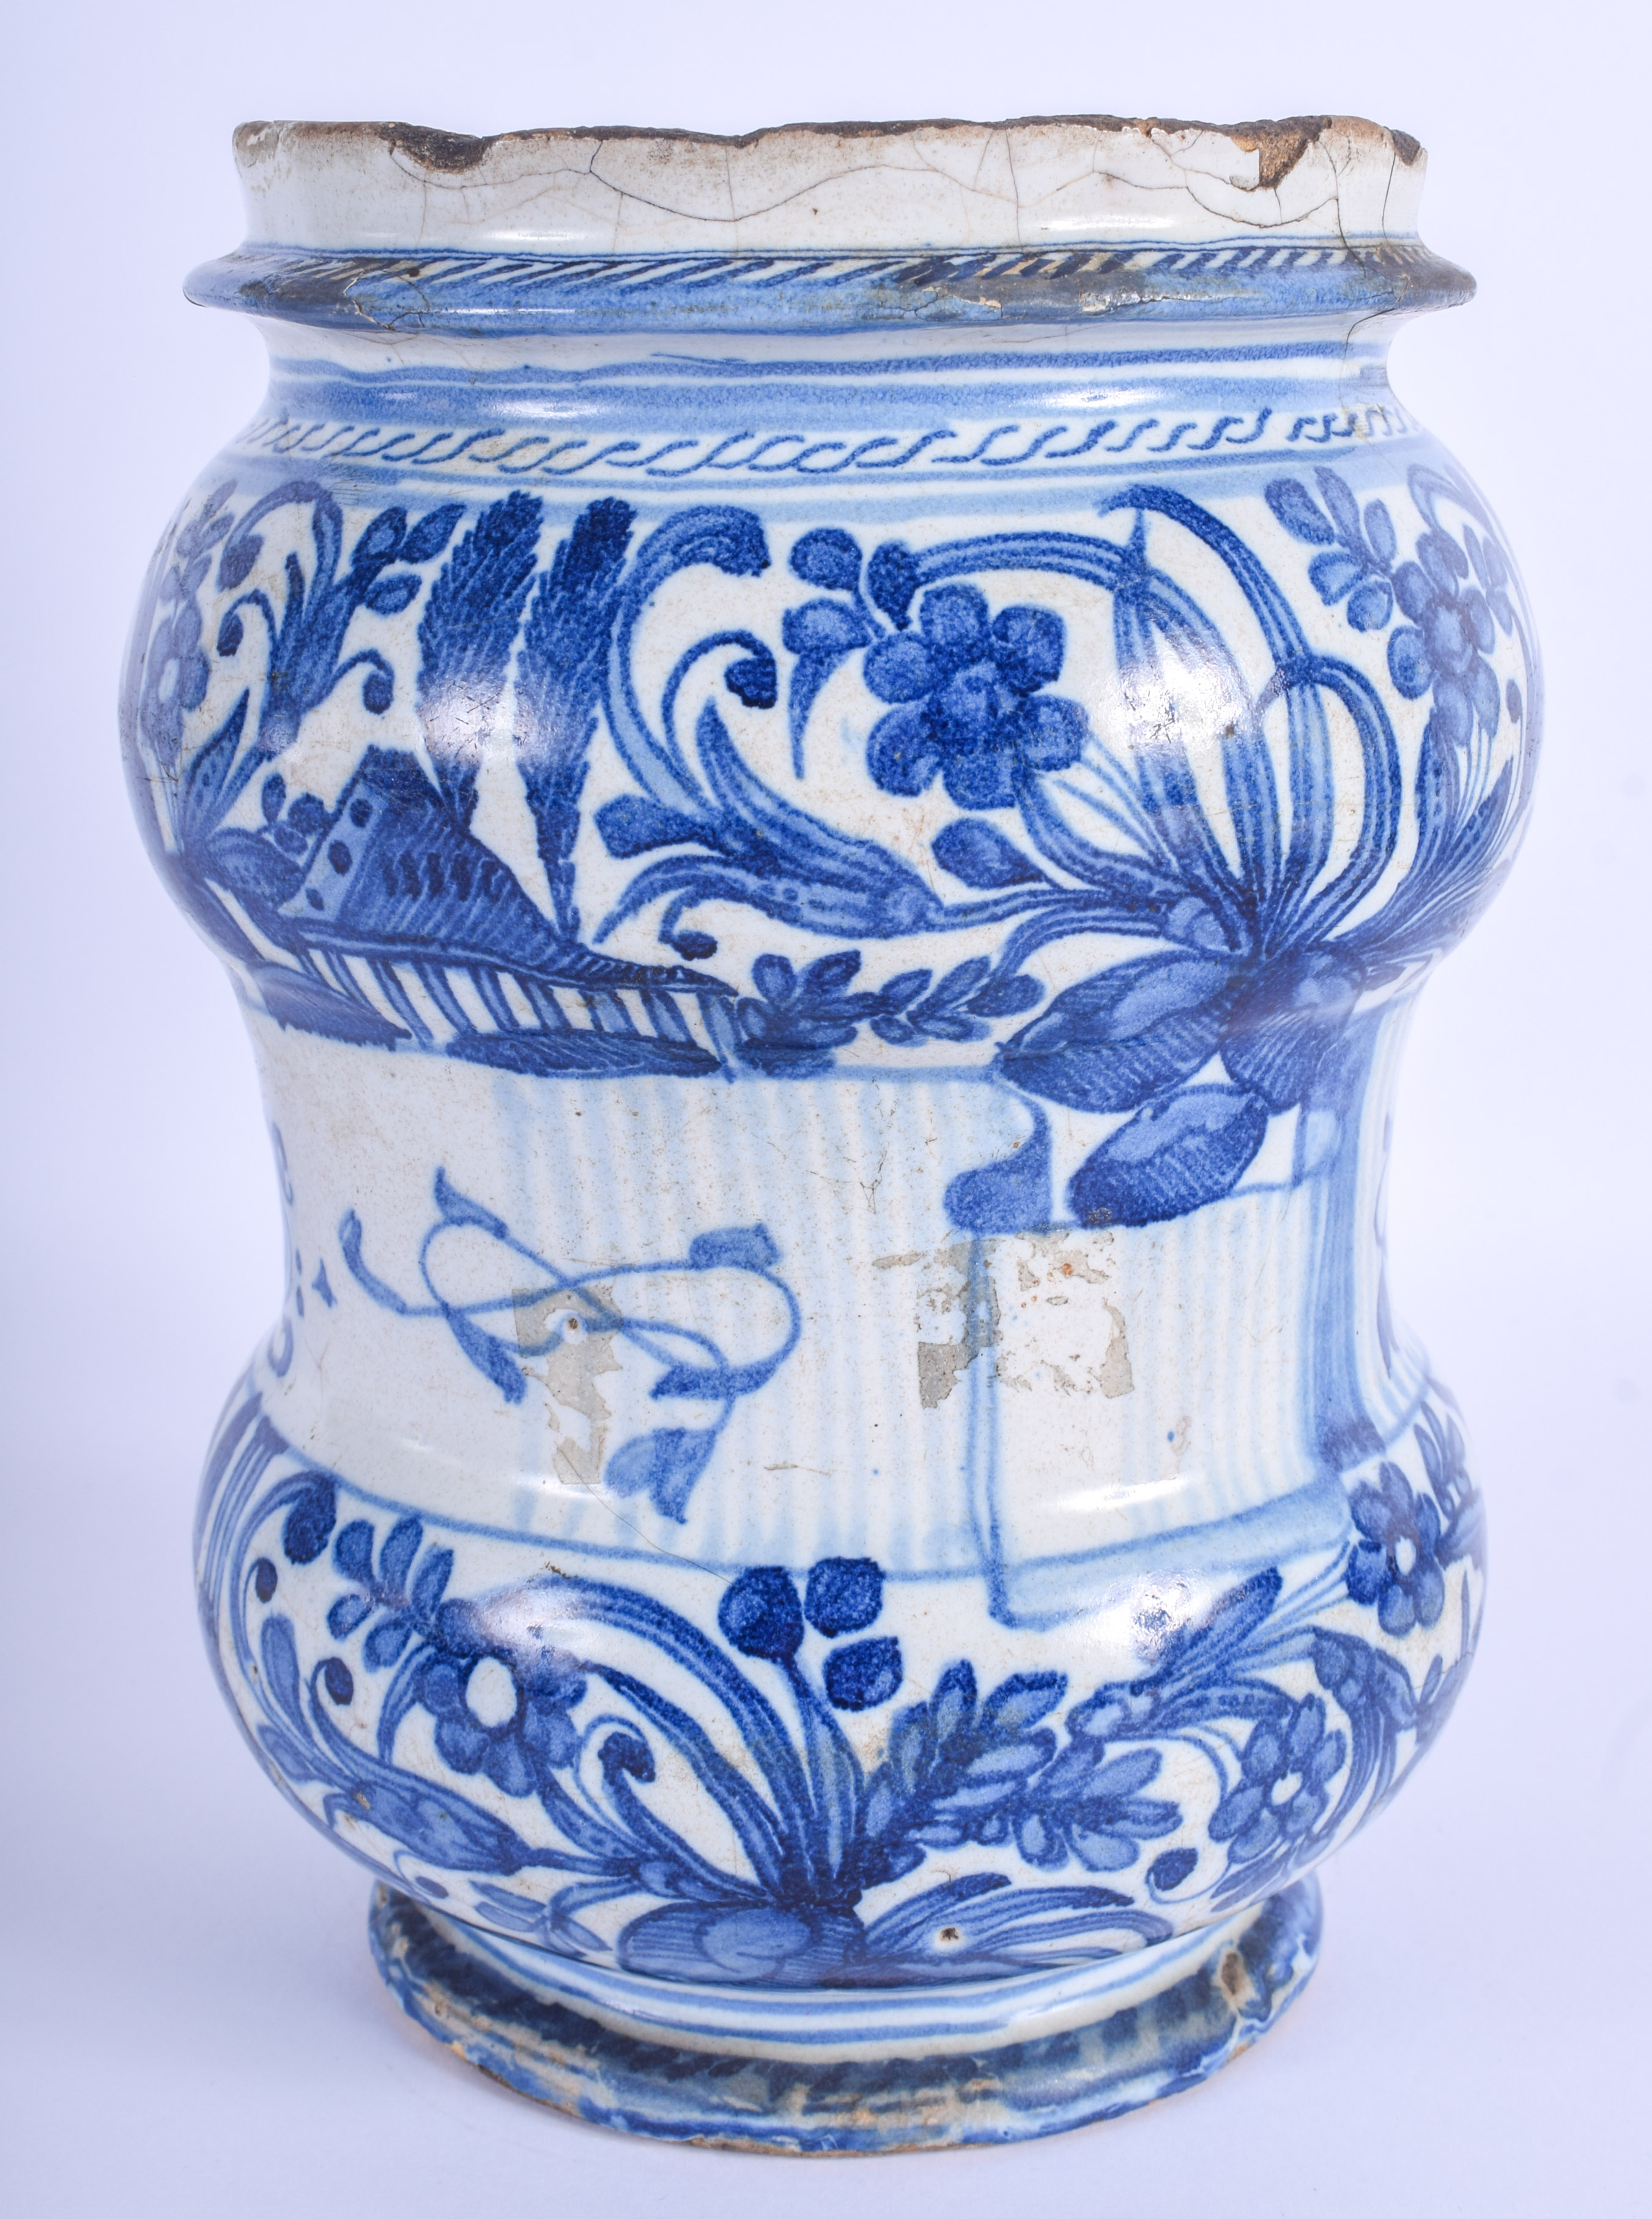 A 17TH/18TH CENTURY SOUTH EUROPEAN MAJOLICA ALBARELLO FAIENCE JAR Italian or Spanish, painted with h - Image 2 of 3